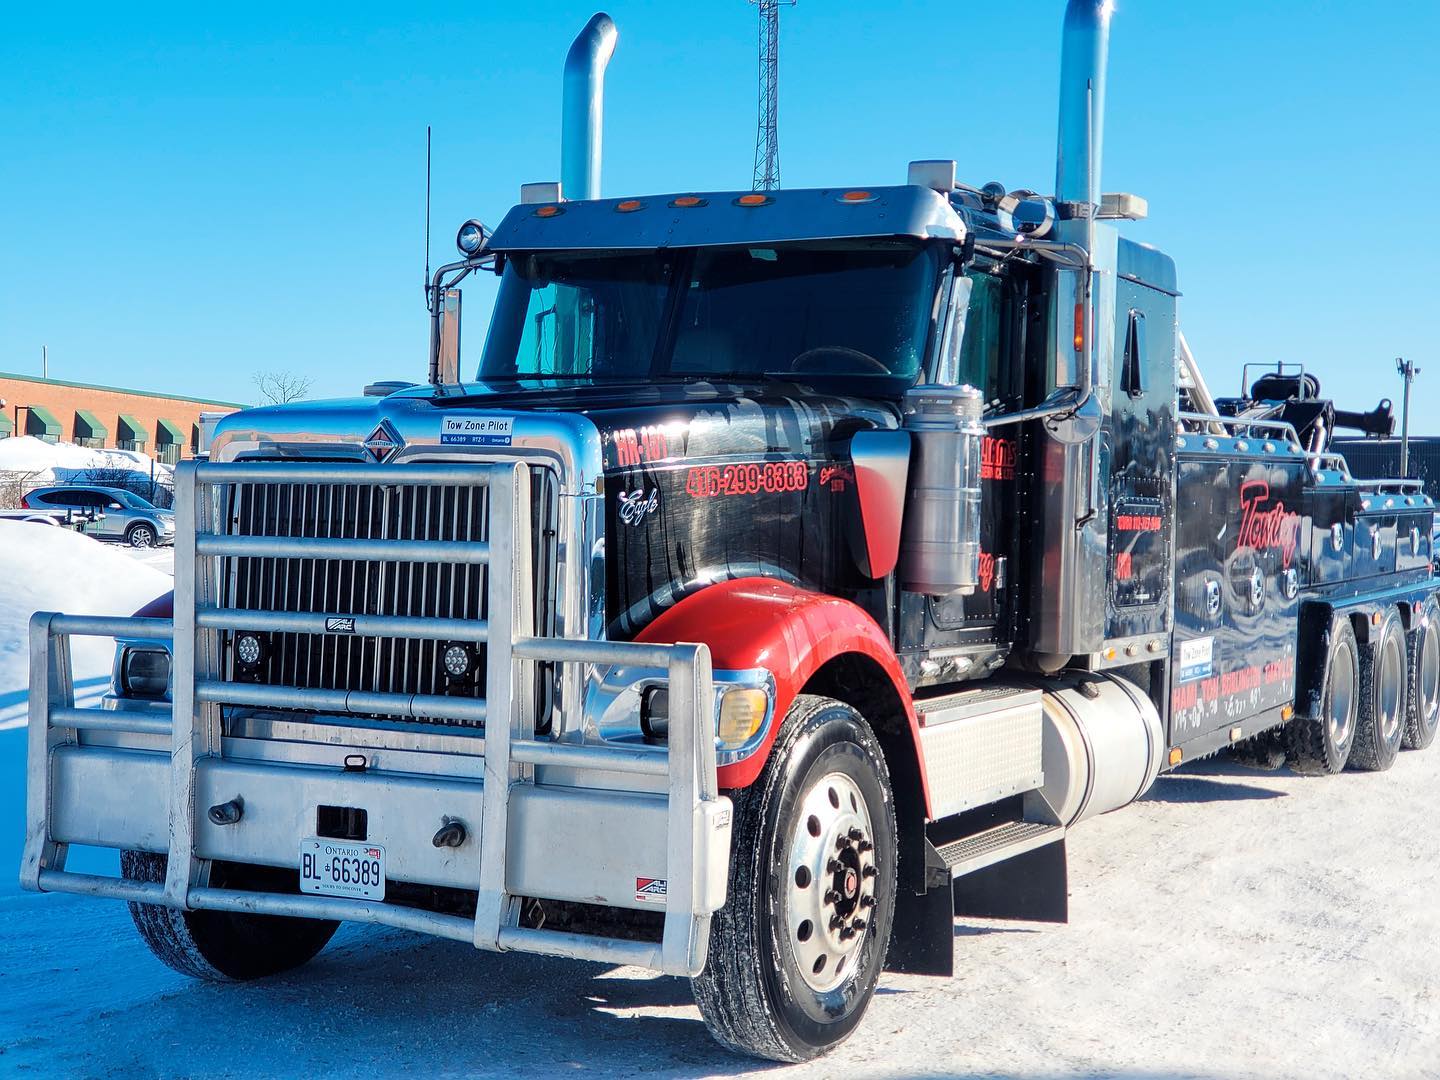 Williams Towing - Recovery Services in Toronto | Williams Towing